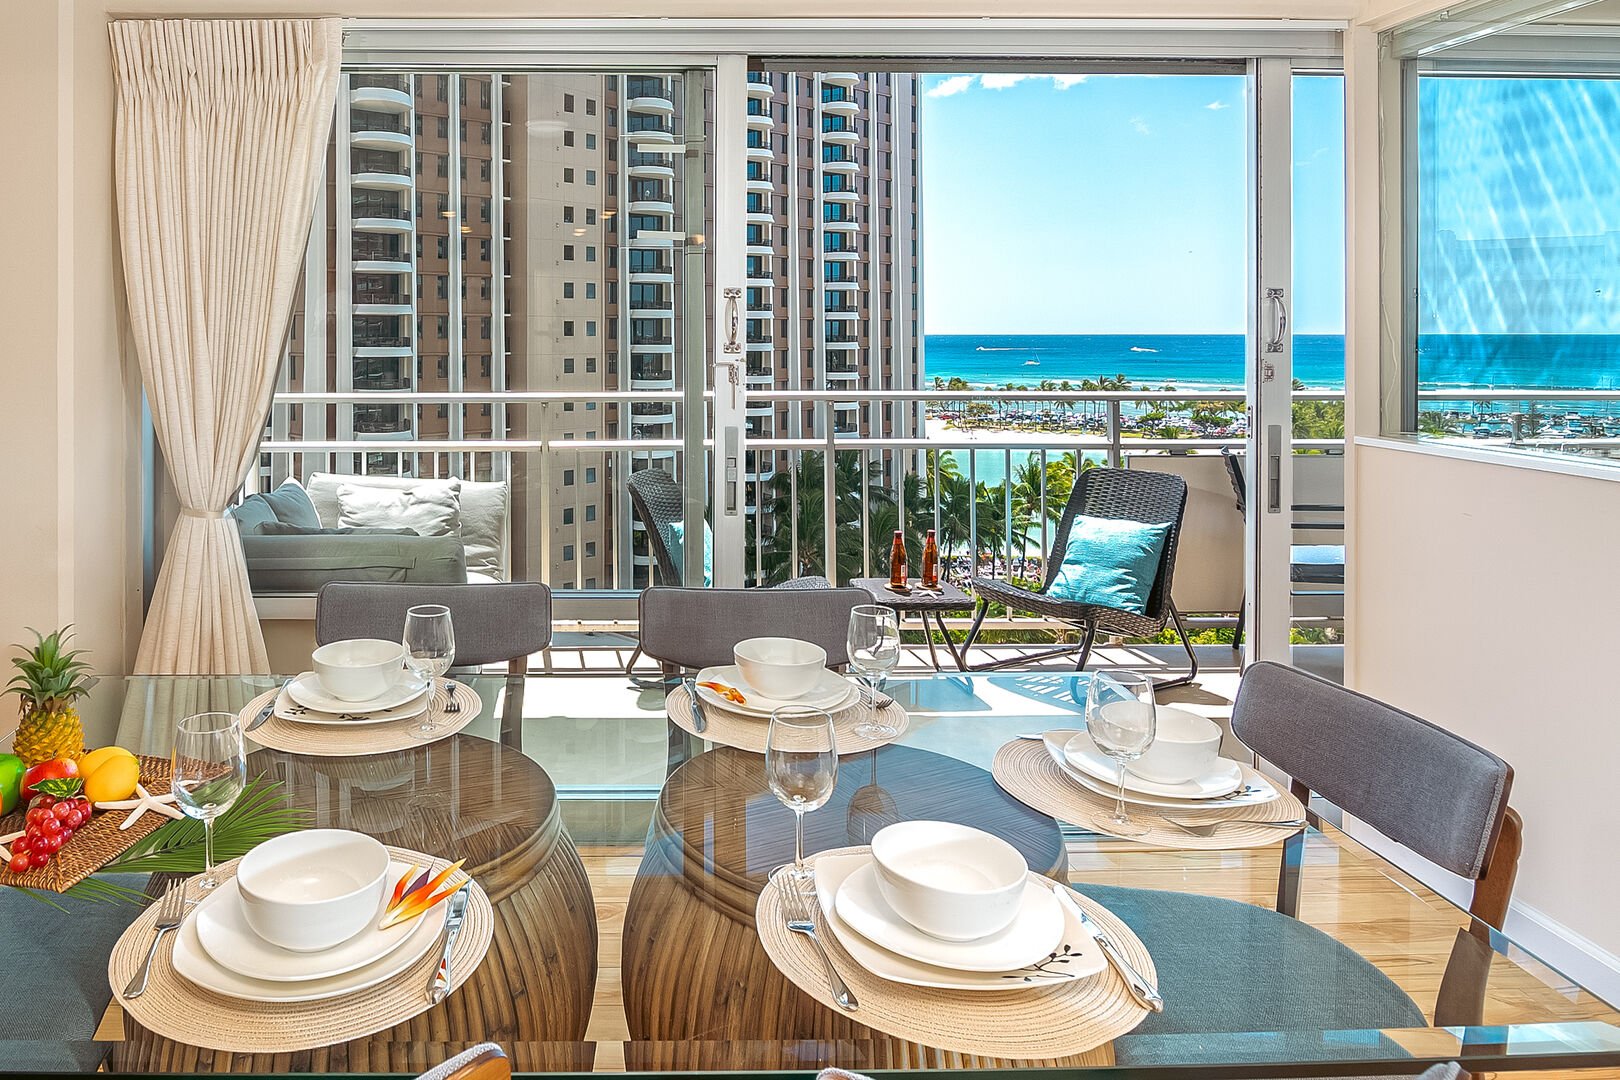 Enjoy shared meals in your dining area with a beautiful ocean view.